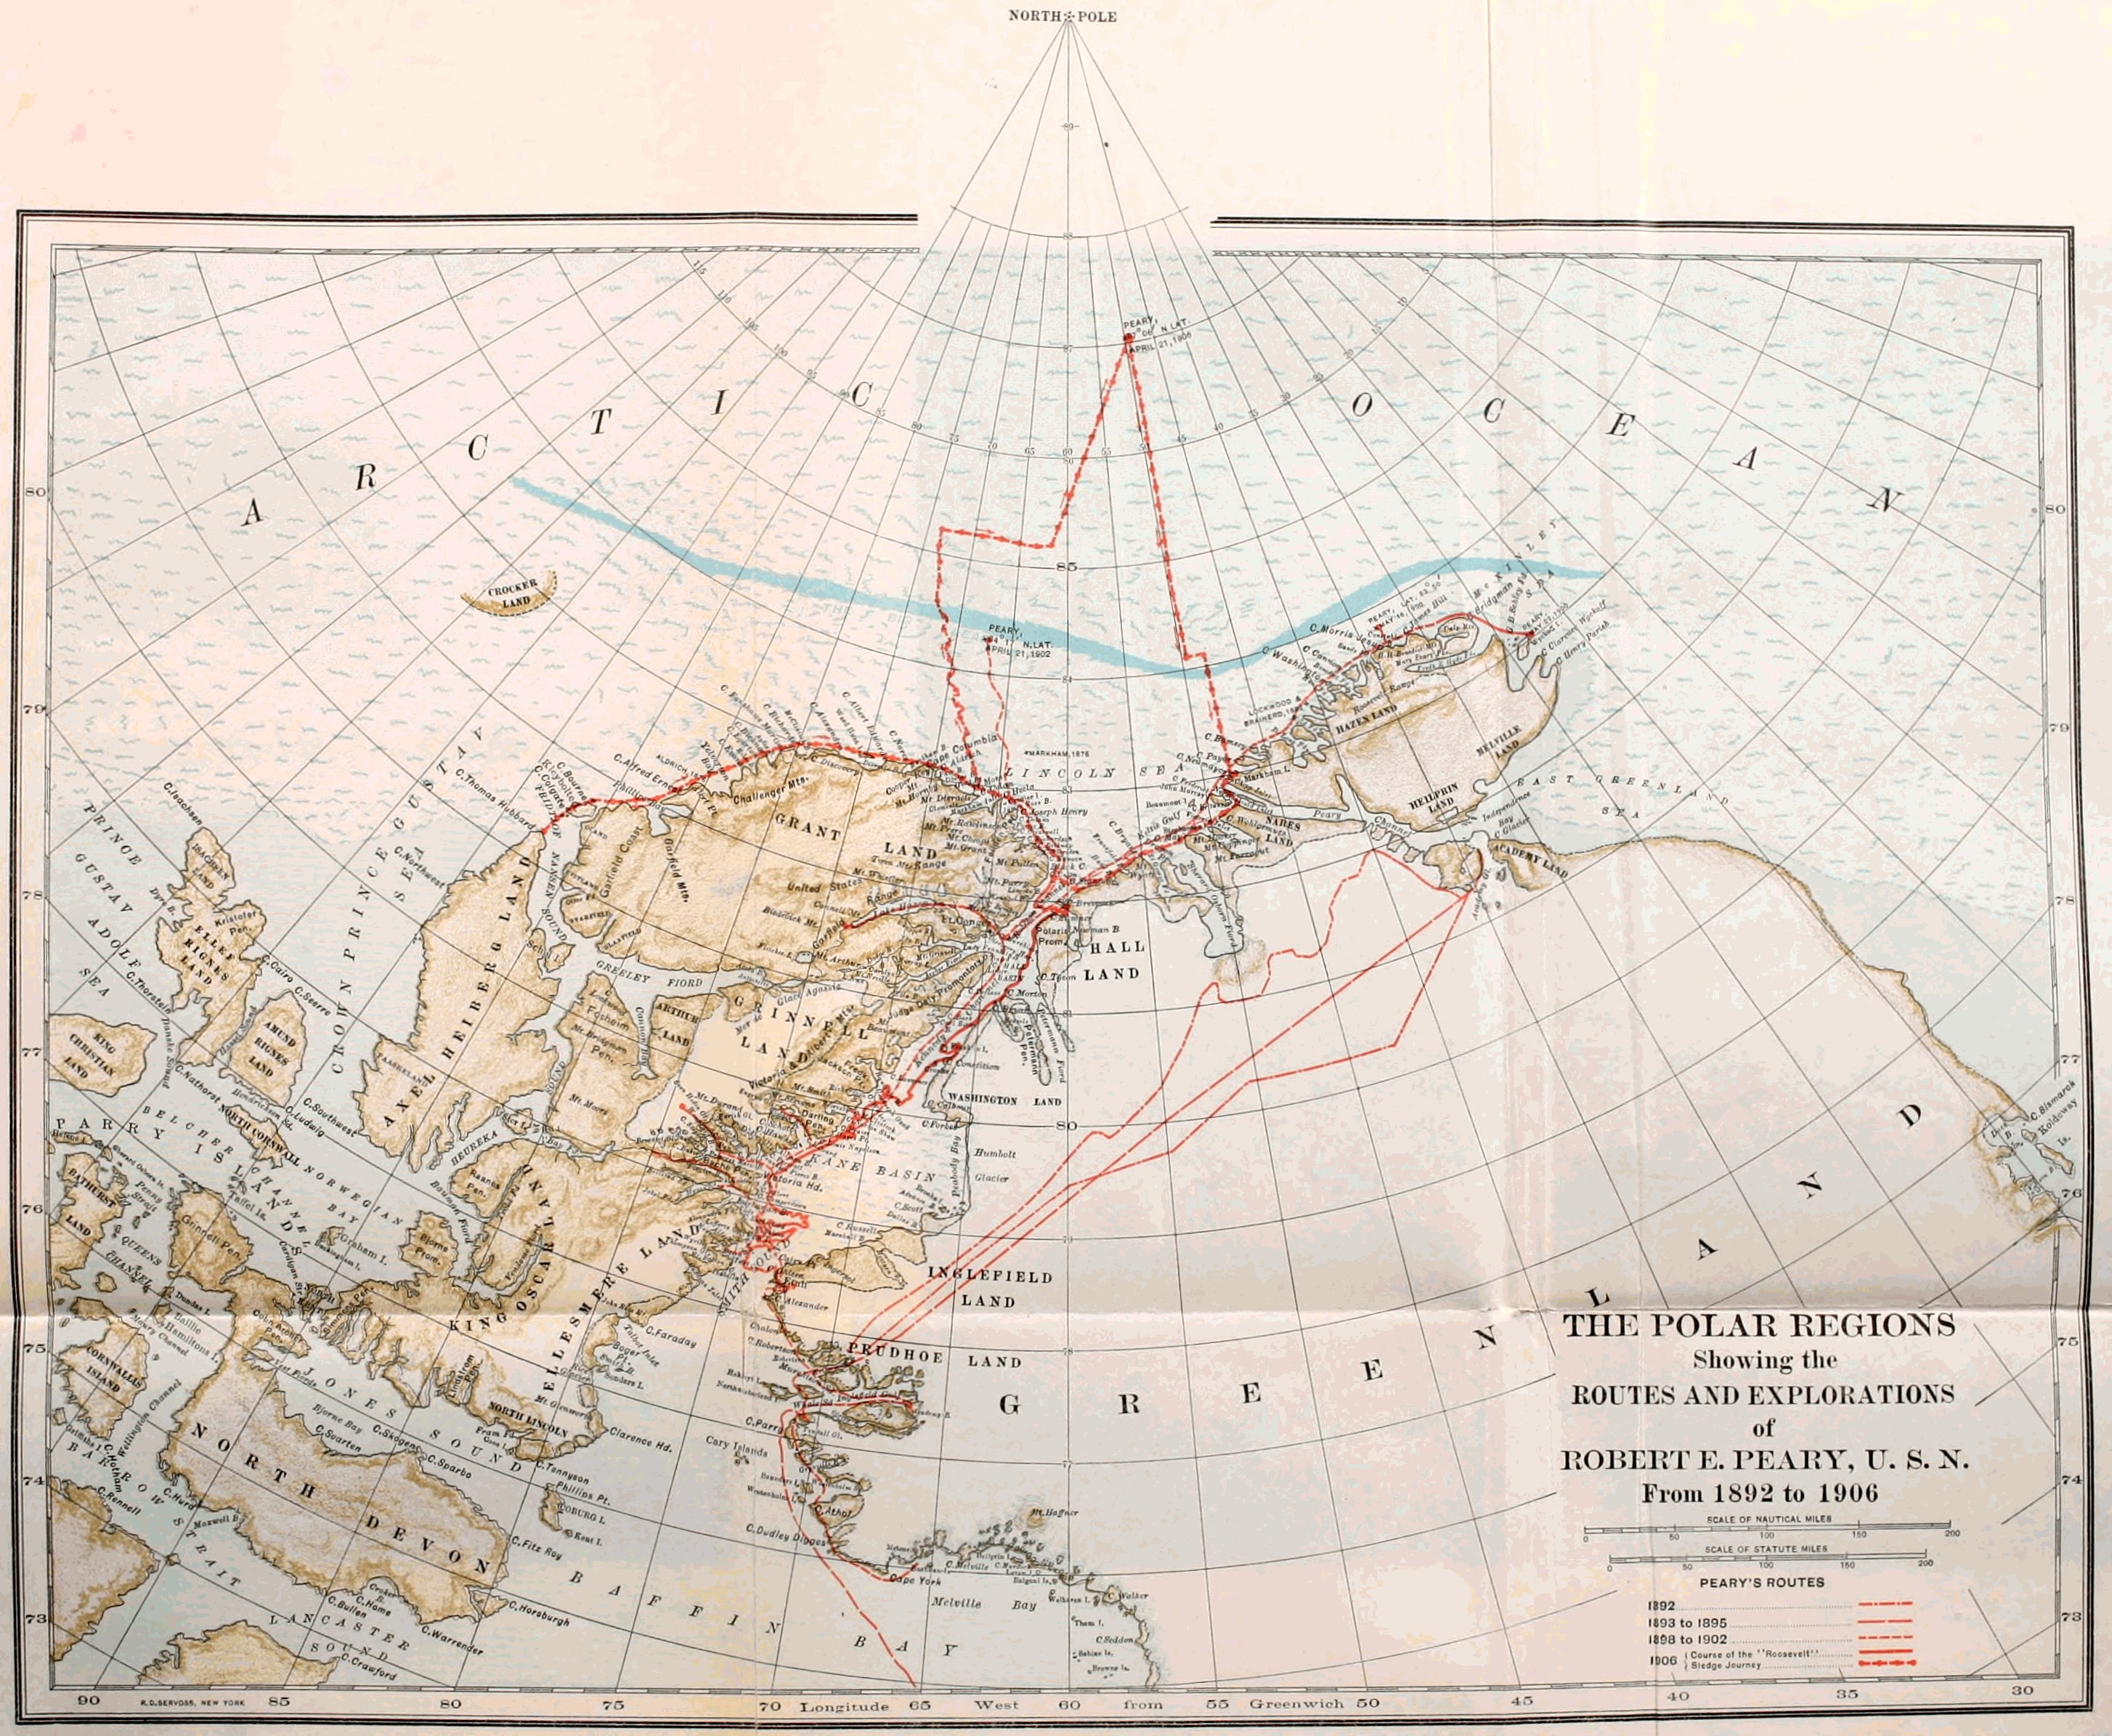 THE POLAR REGIONS Showing the ROUTES AND EXPLORATIONS of ROBERT E. PEARY, U. S. N. From 1892 to 1906